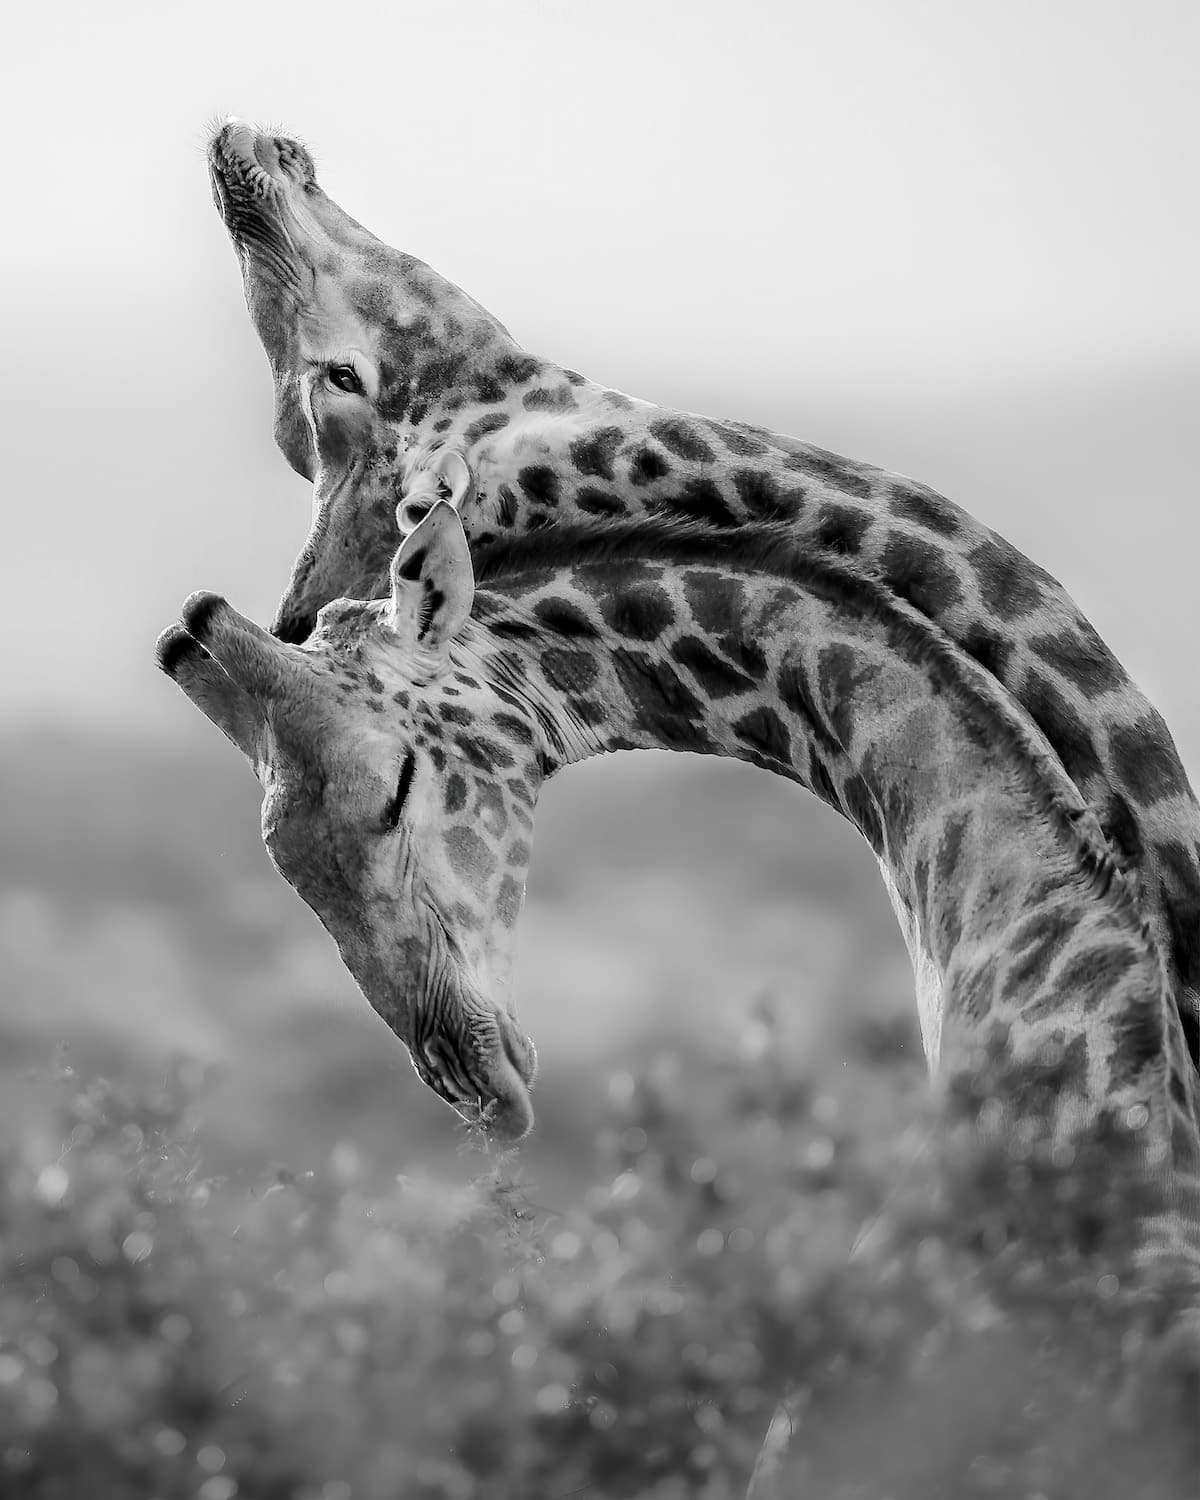 Two Young Giraffes Necking